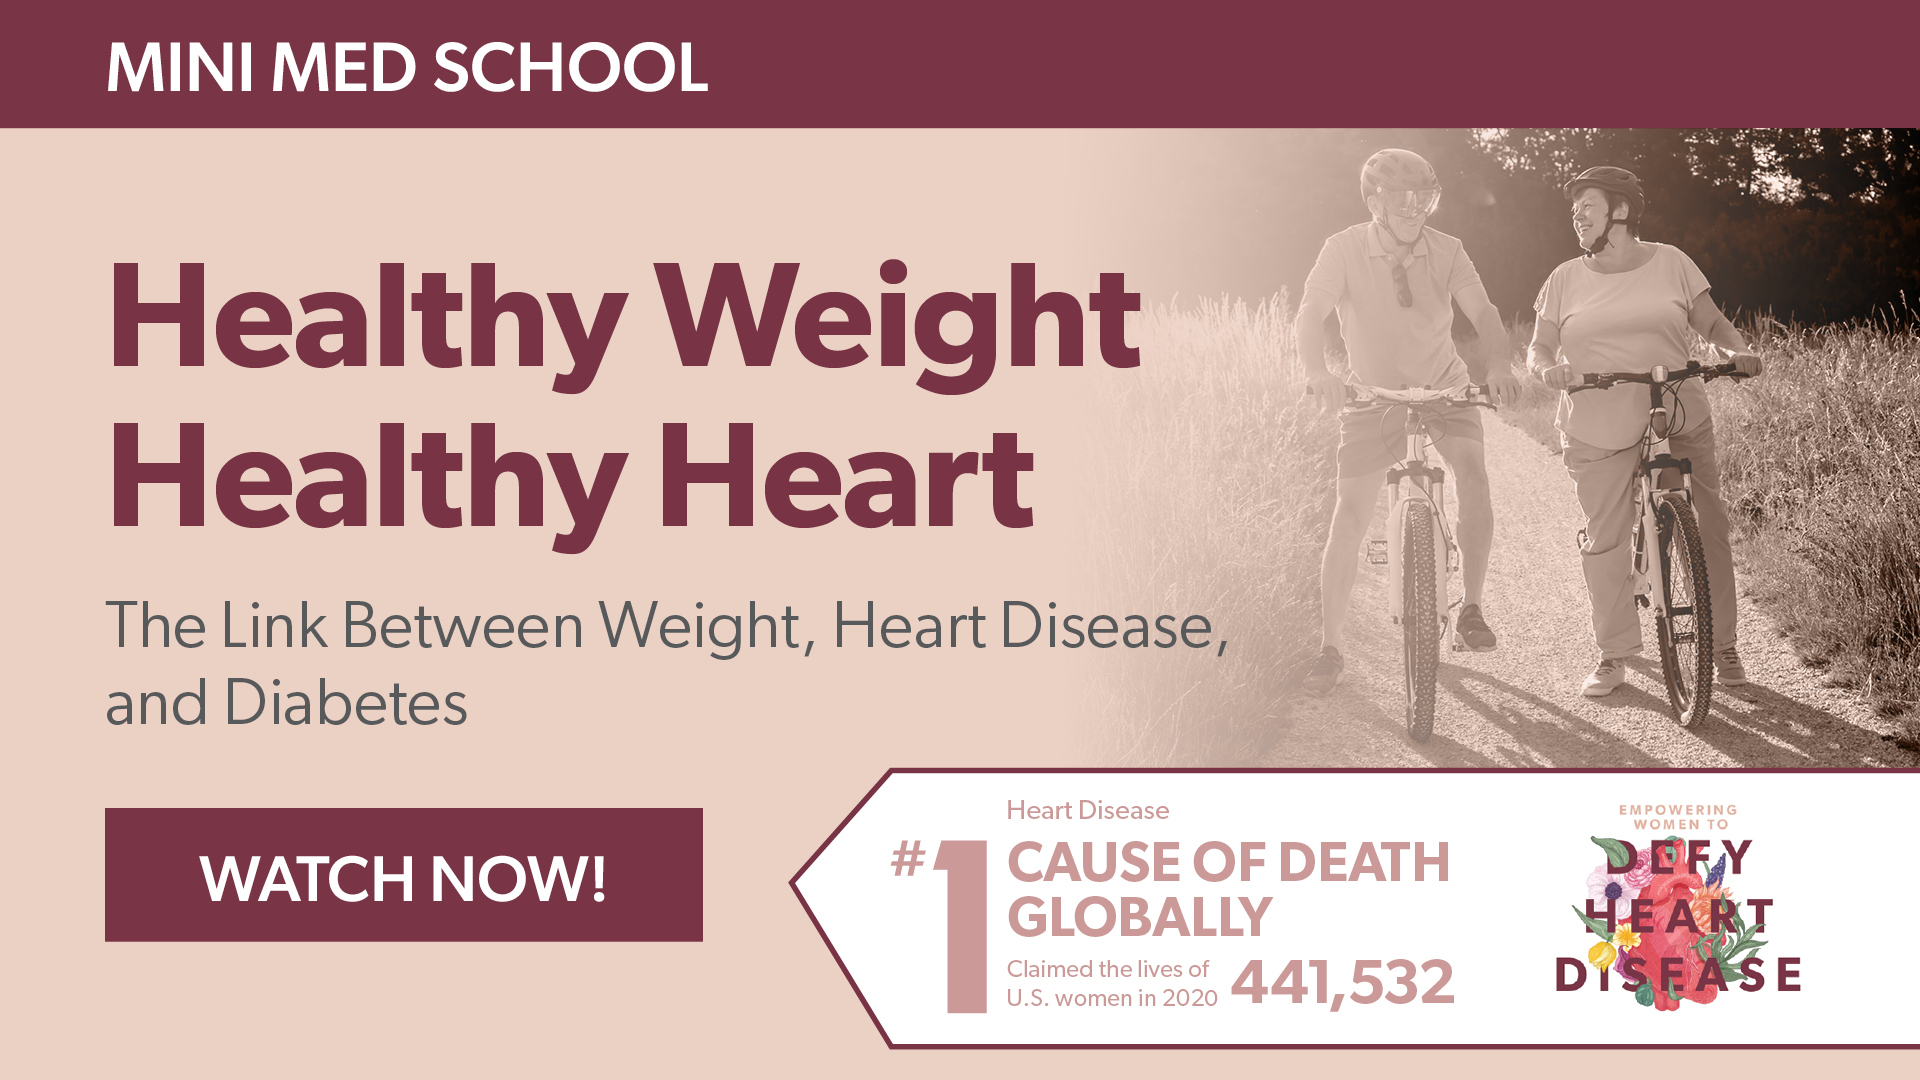 WHHI MINI MED SCHOOL Healthy Heart Healthy Weight The Link Between Weight, Heart Disease, and Diabetes Watch Now